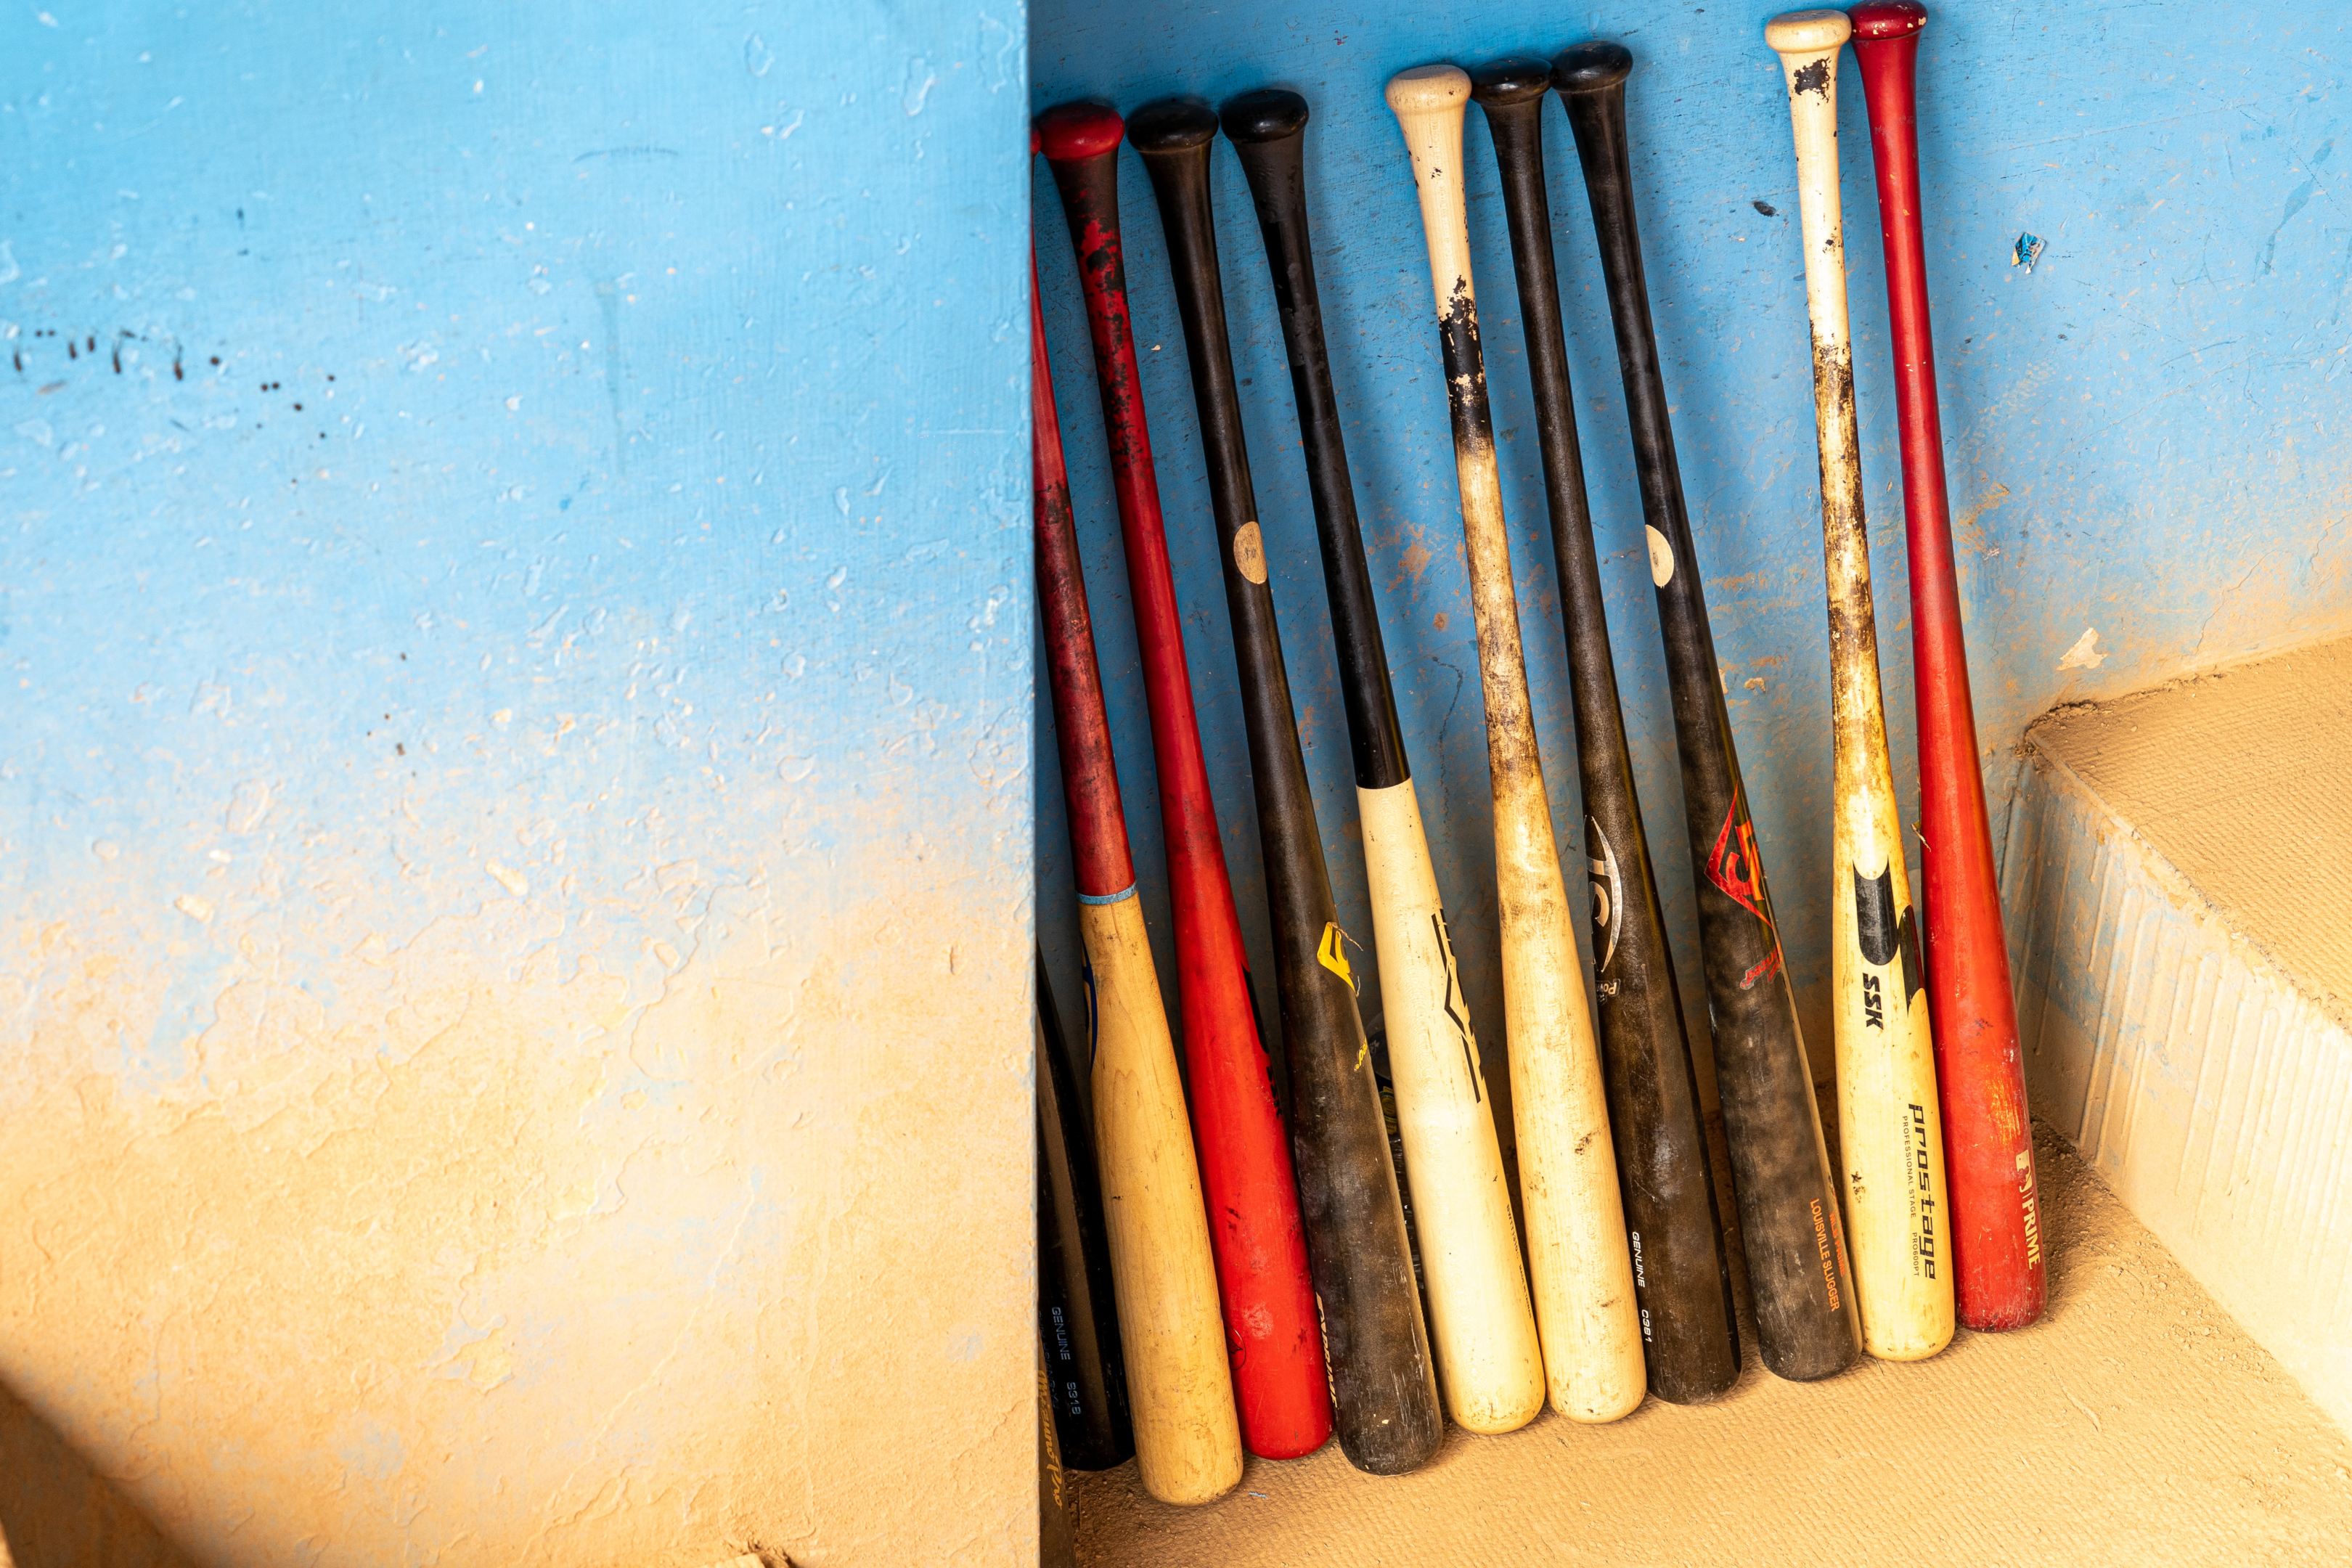 A number of wooden bats in a dugout.